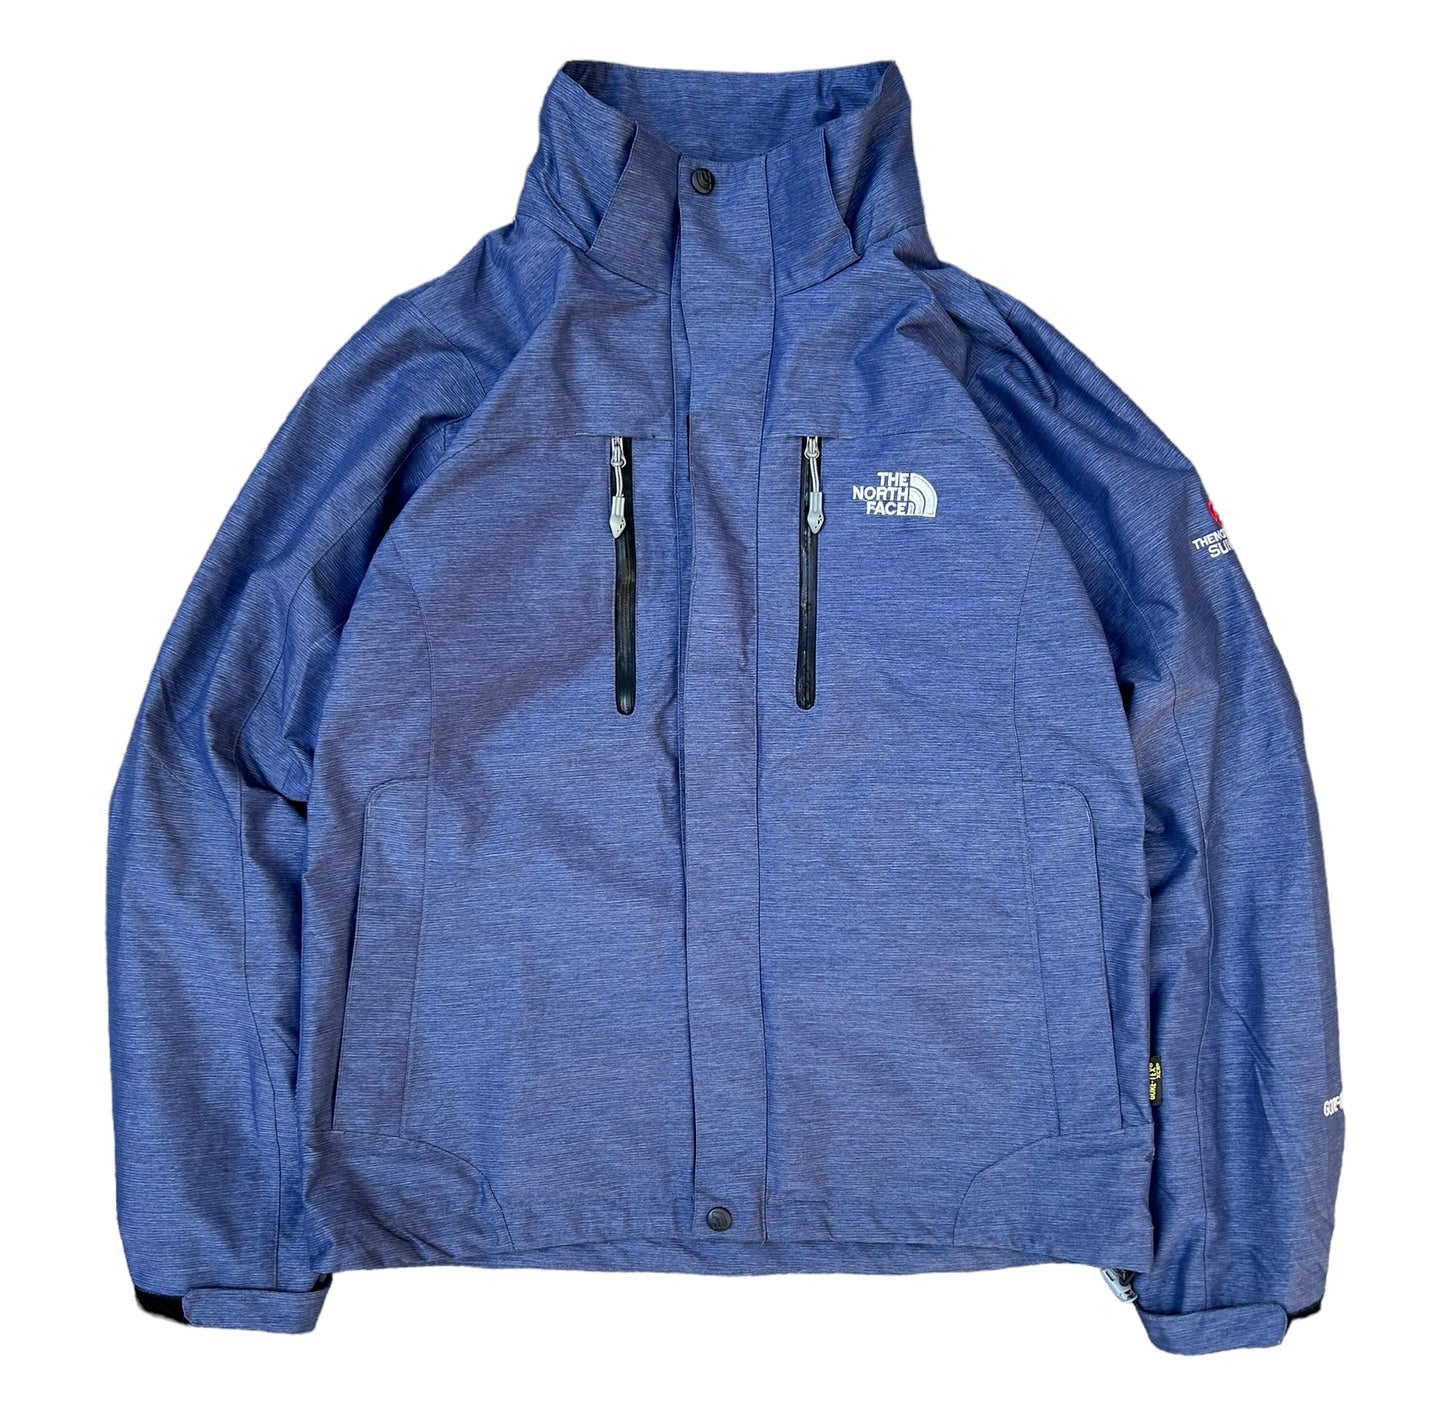 The North Face Summit Series Jacket